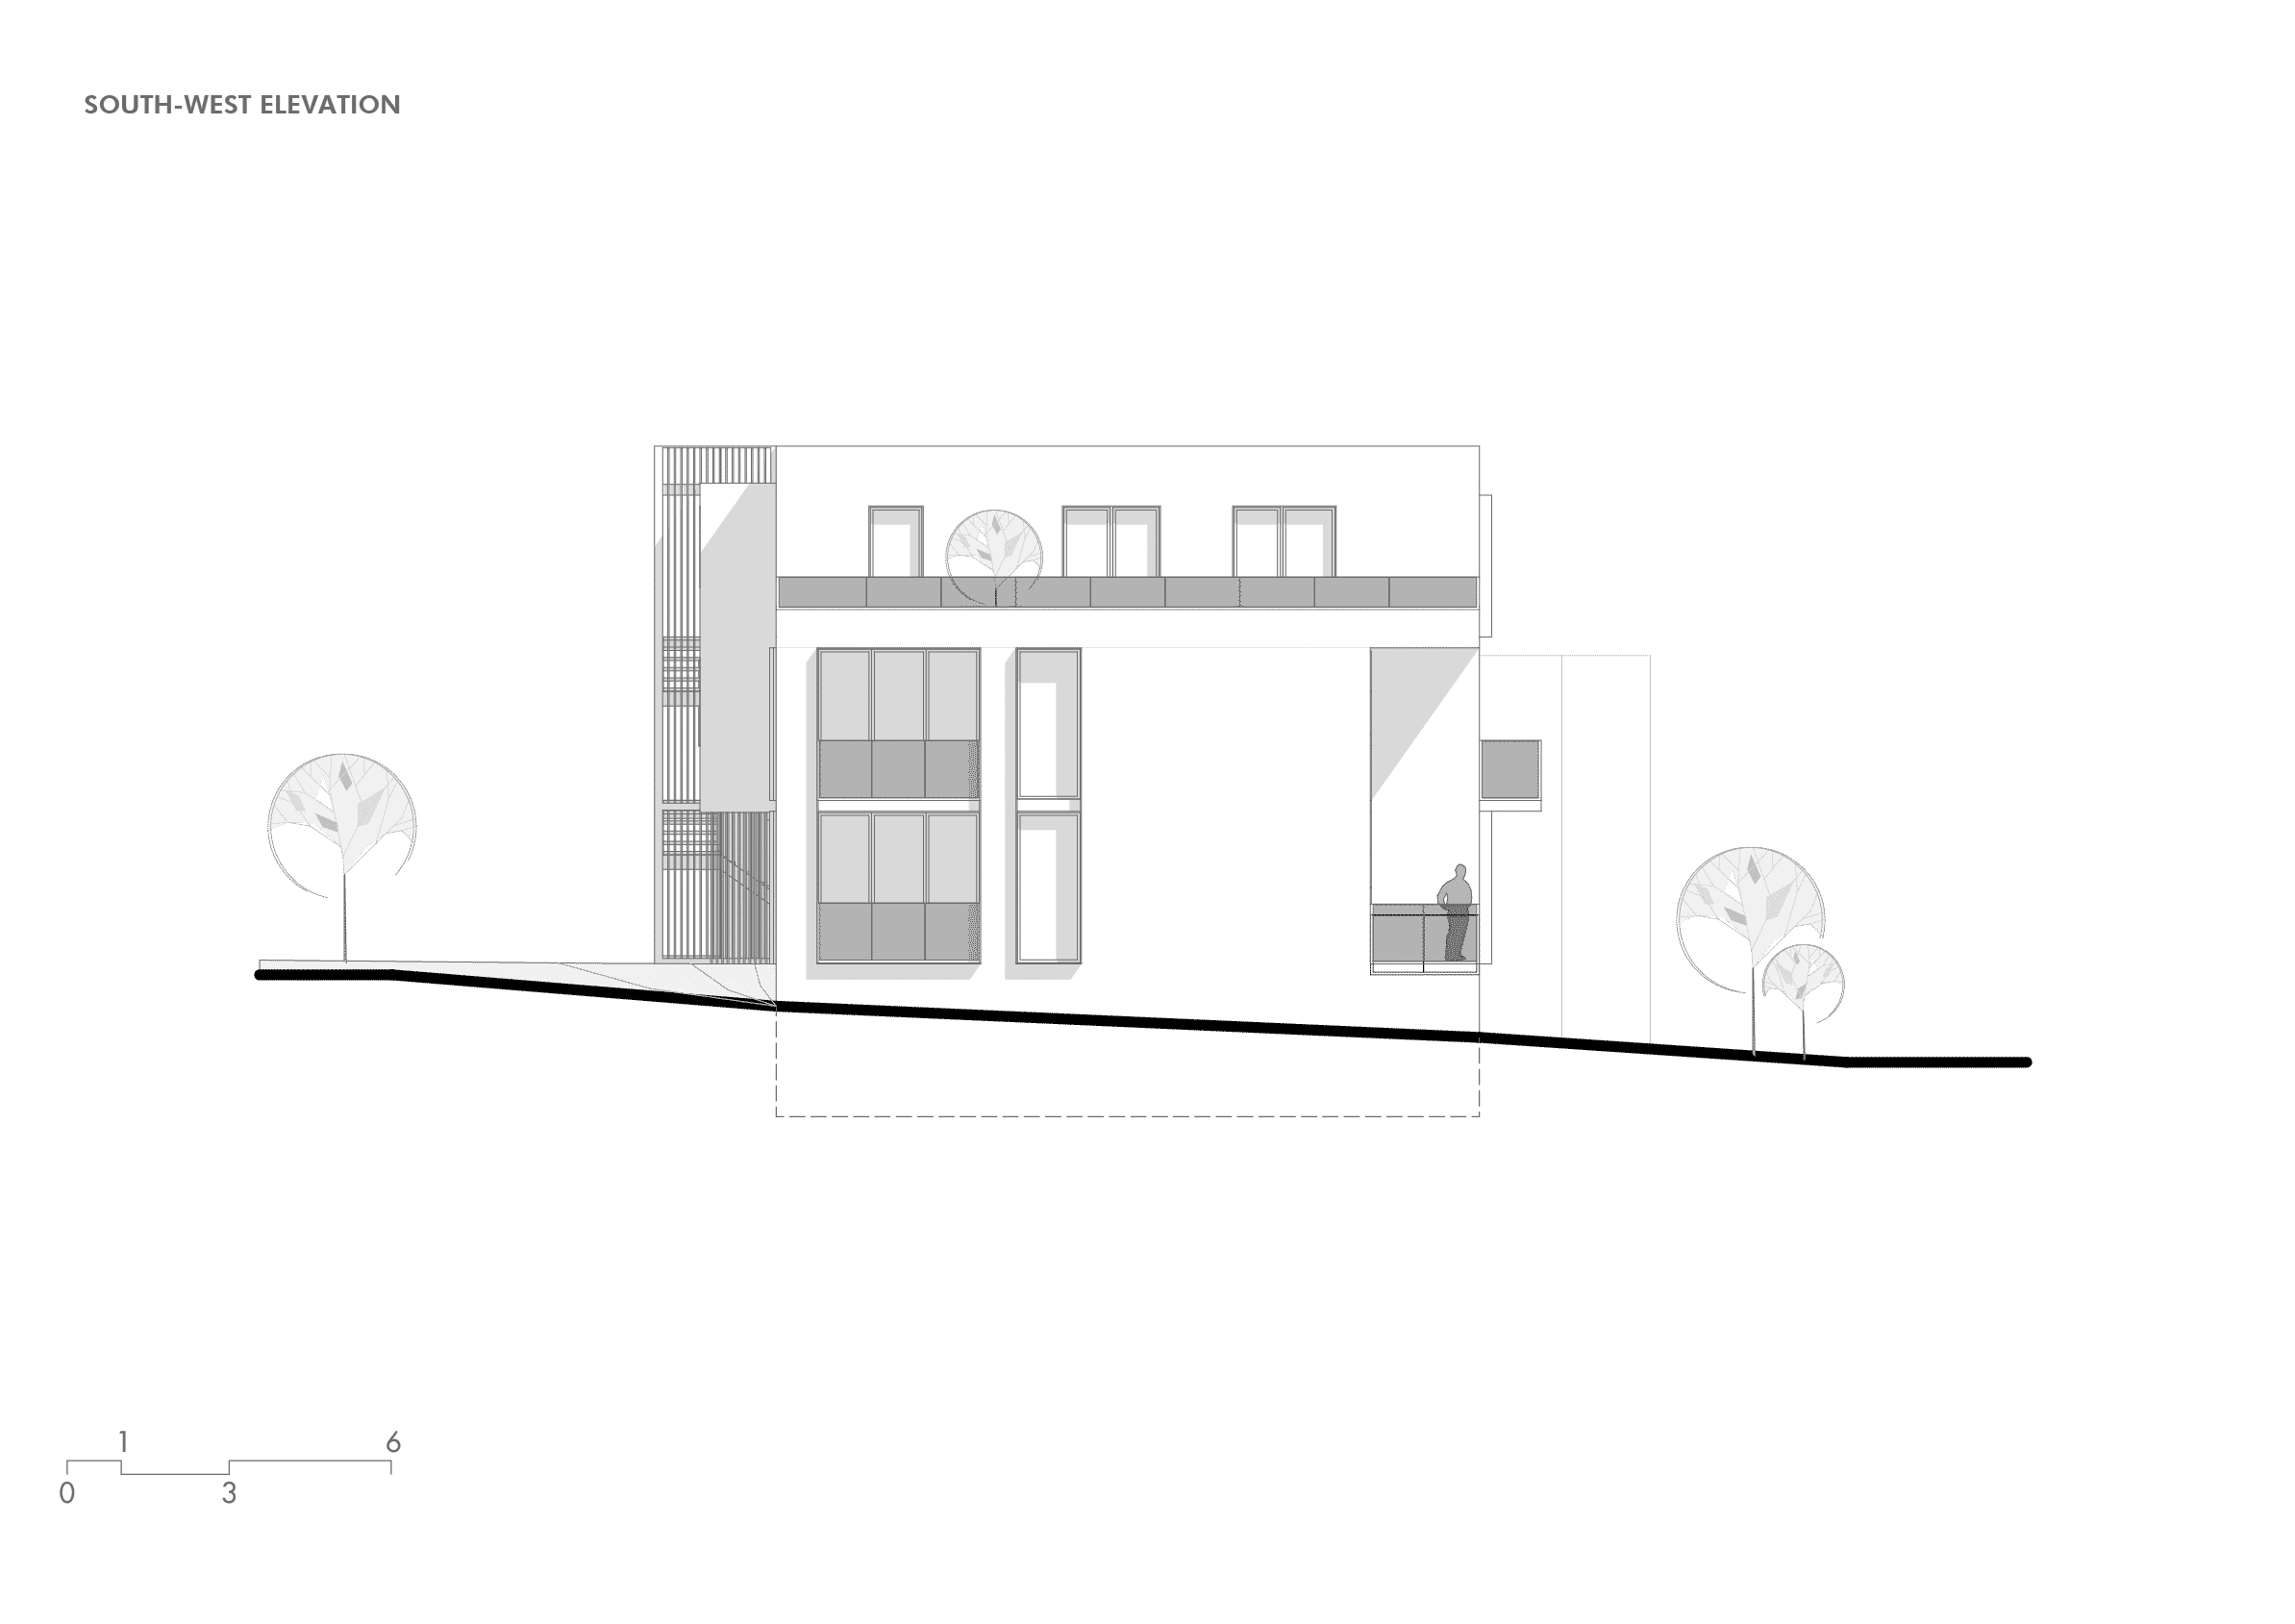 010-swiss-project-south-west-elevation2x